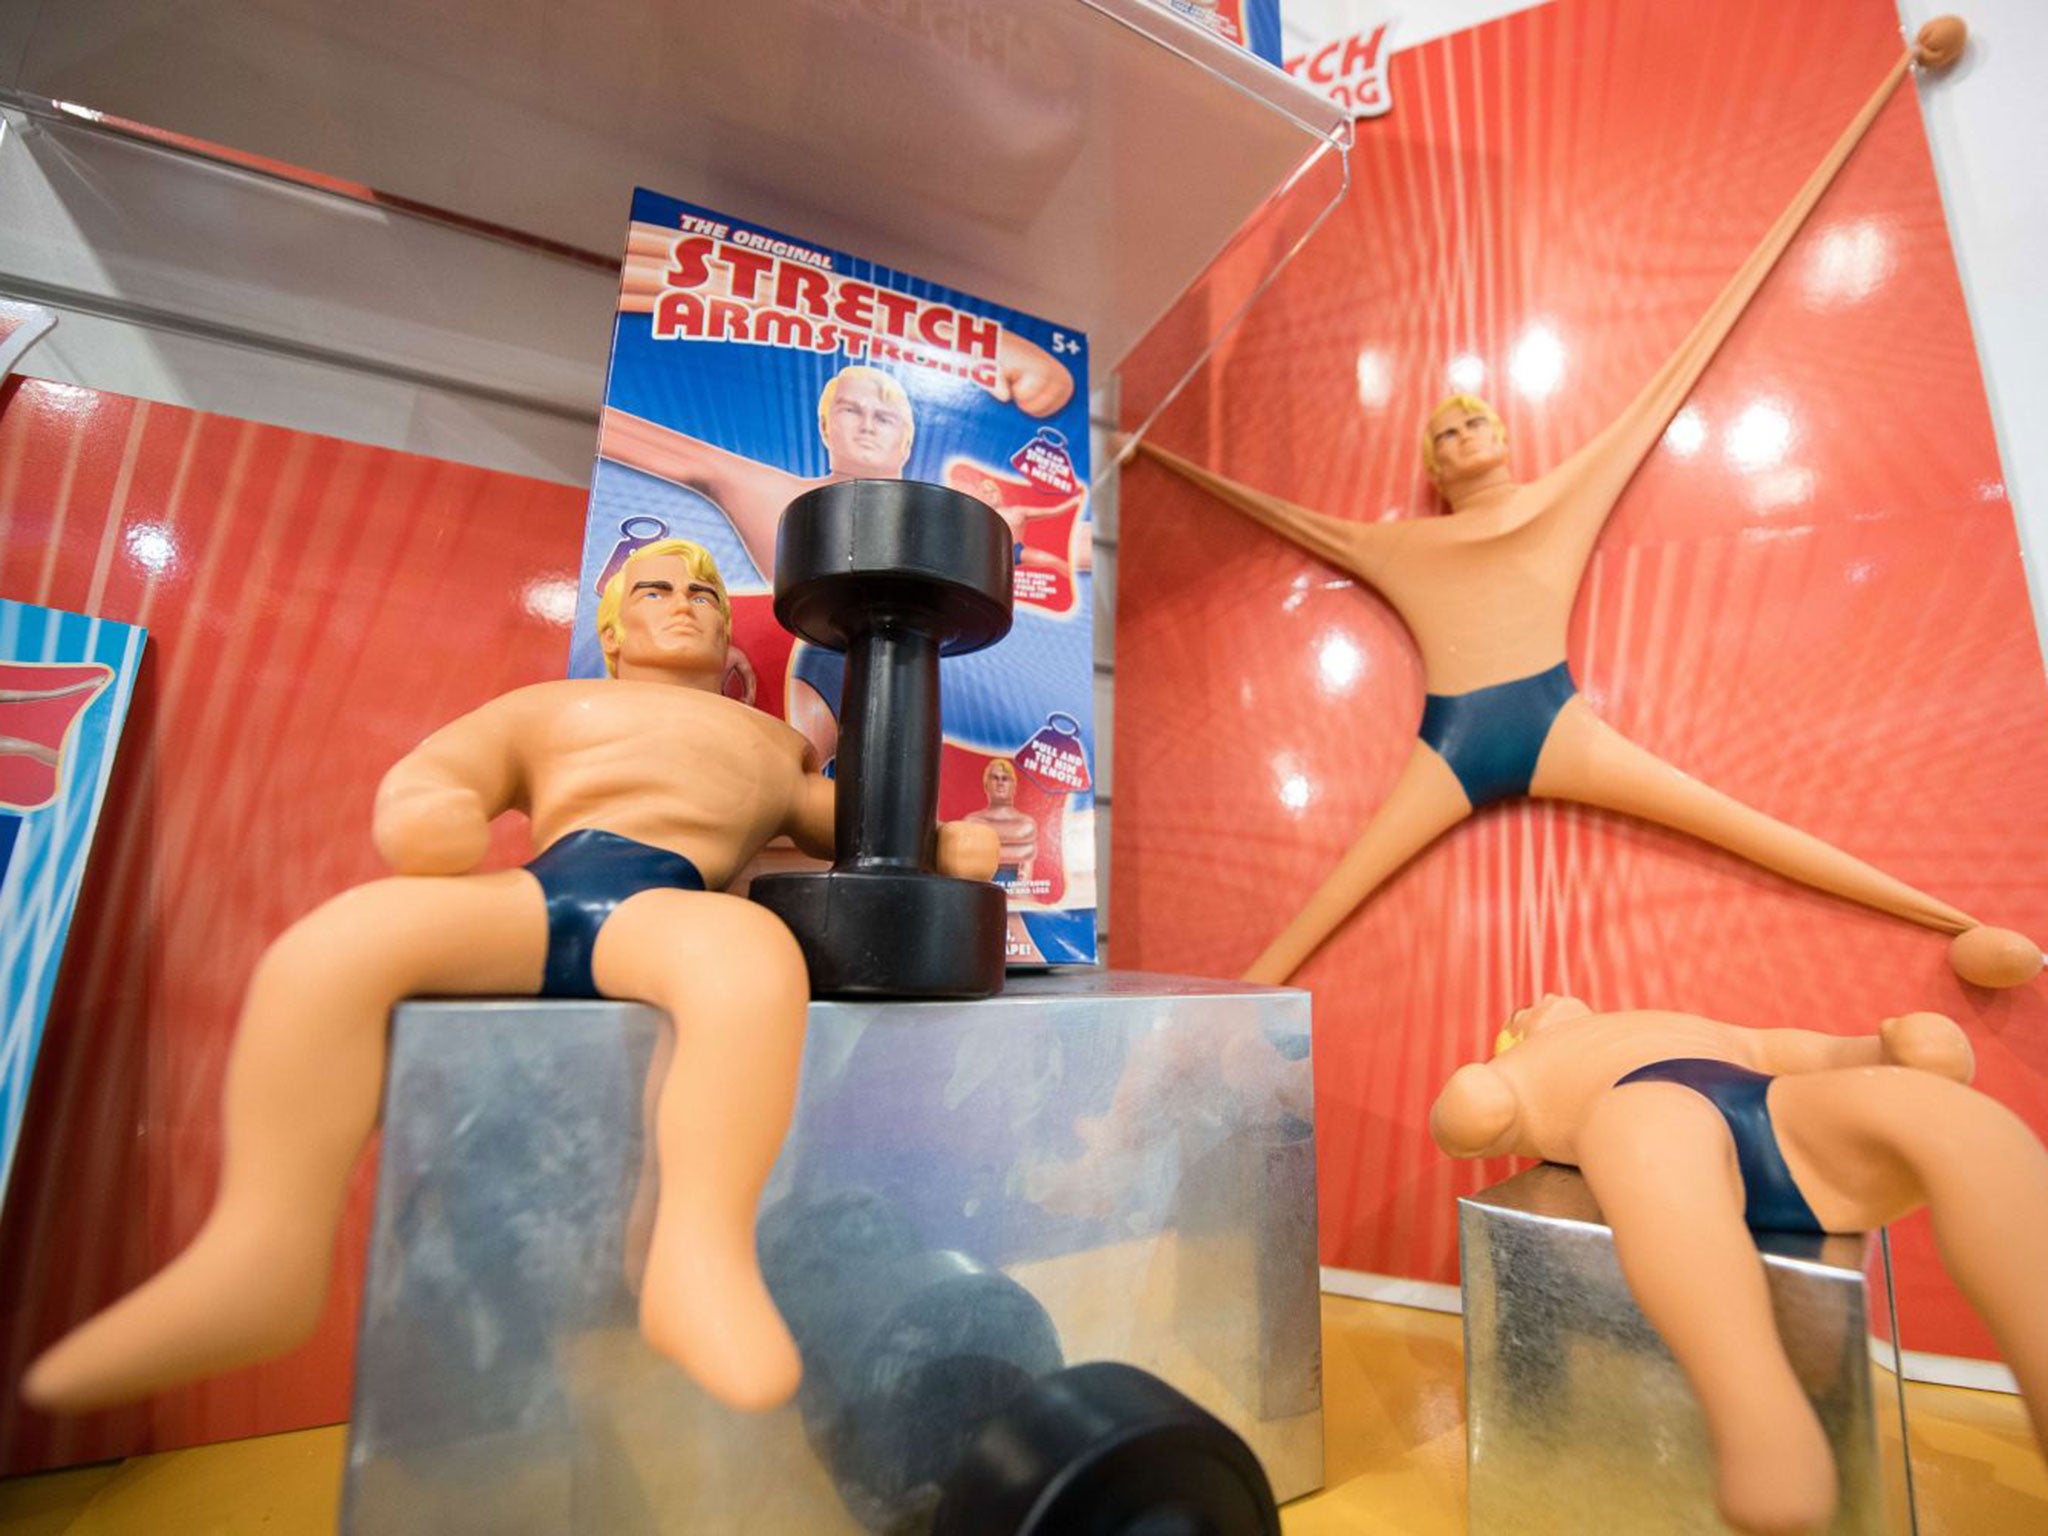 The 2016 version of Stretch Armstrong. Slightly thinner and with more prominent abs – but still just latex filled with corn syrup